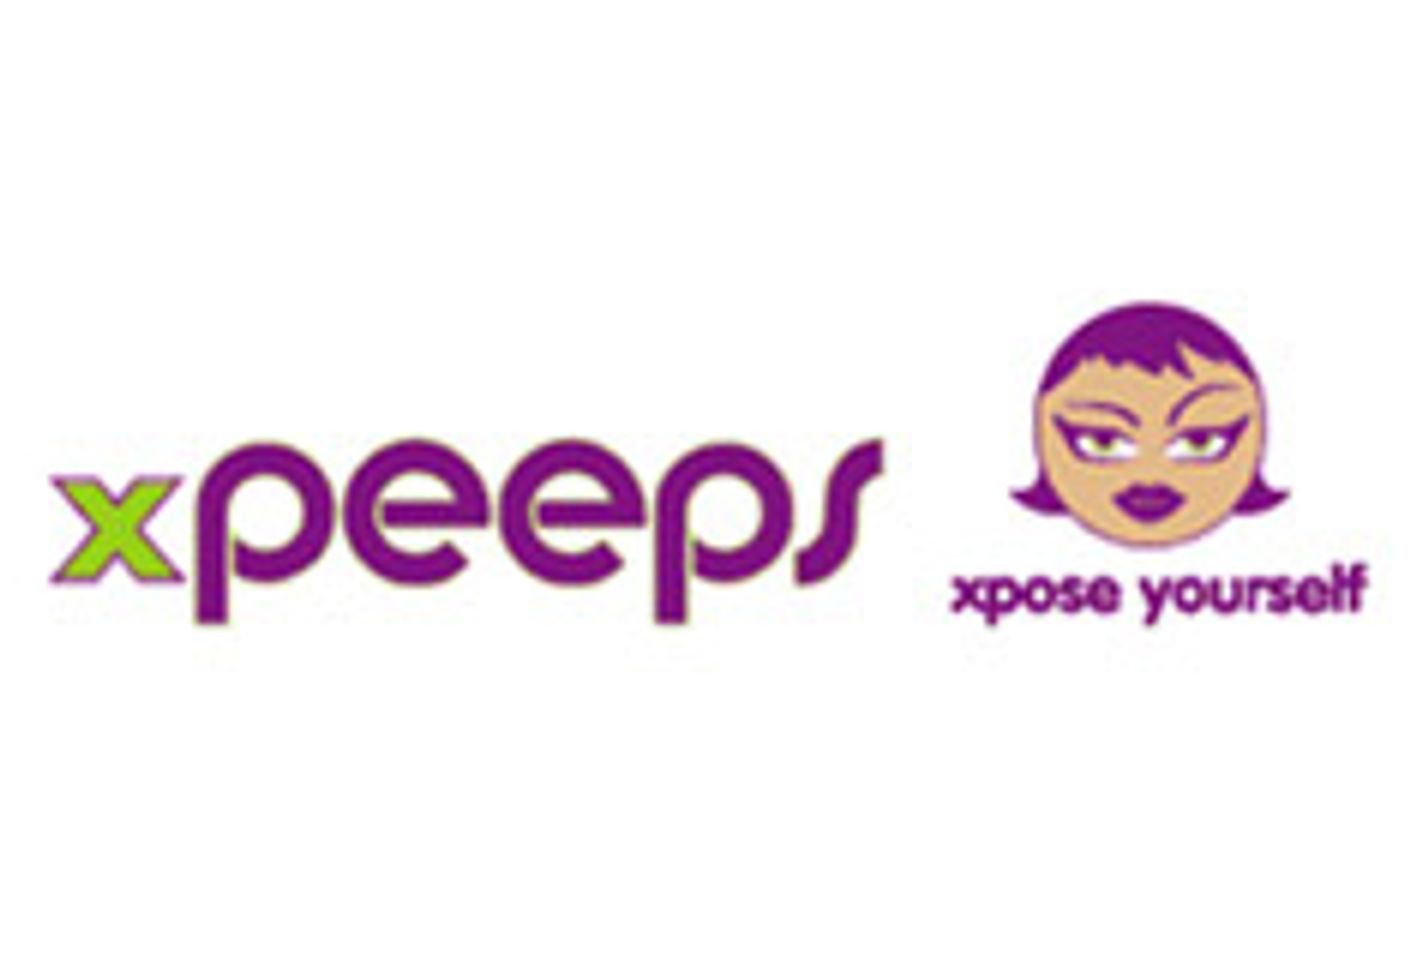 Xpeeps.com Launches